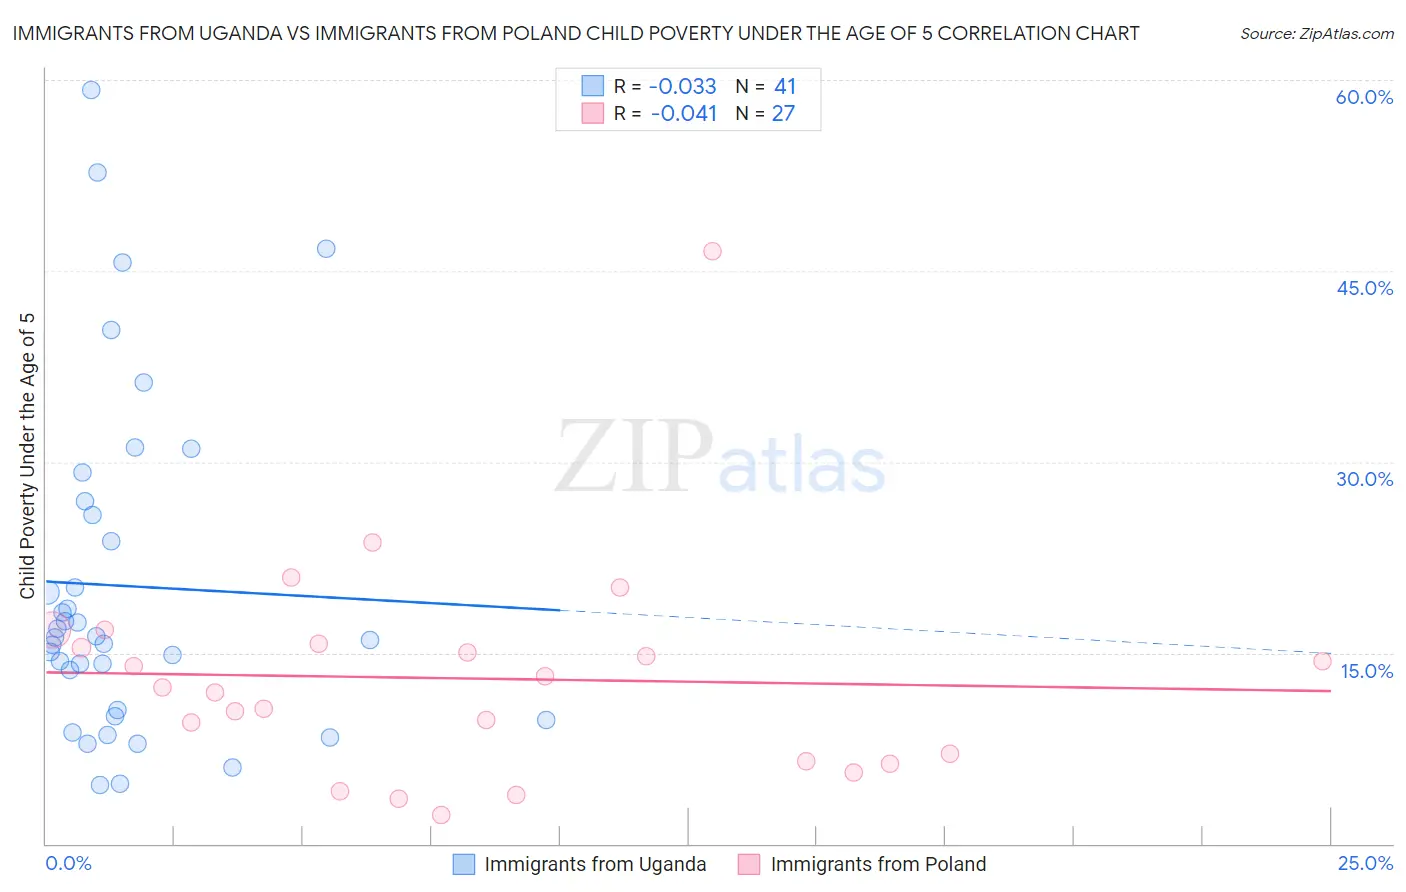 Immigrants from Uganda vs Immigrants from Poland Child Poverty Under the Age of 5